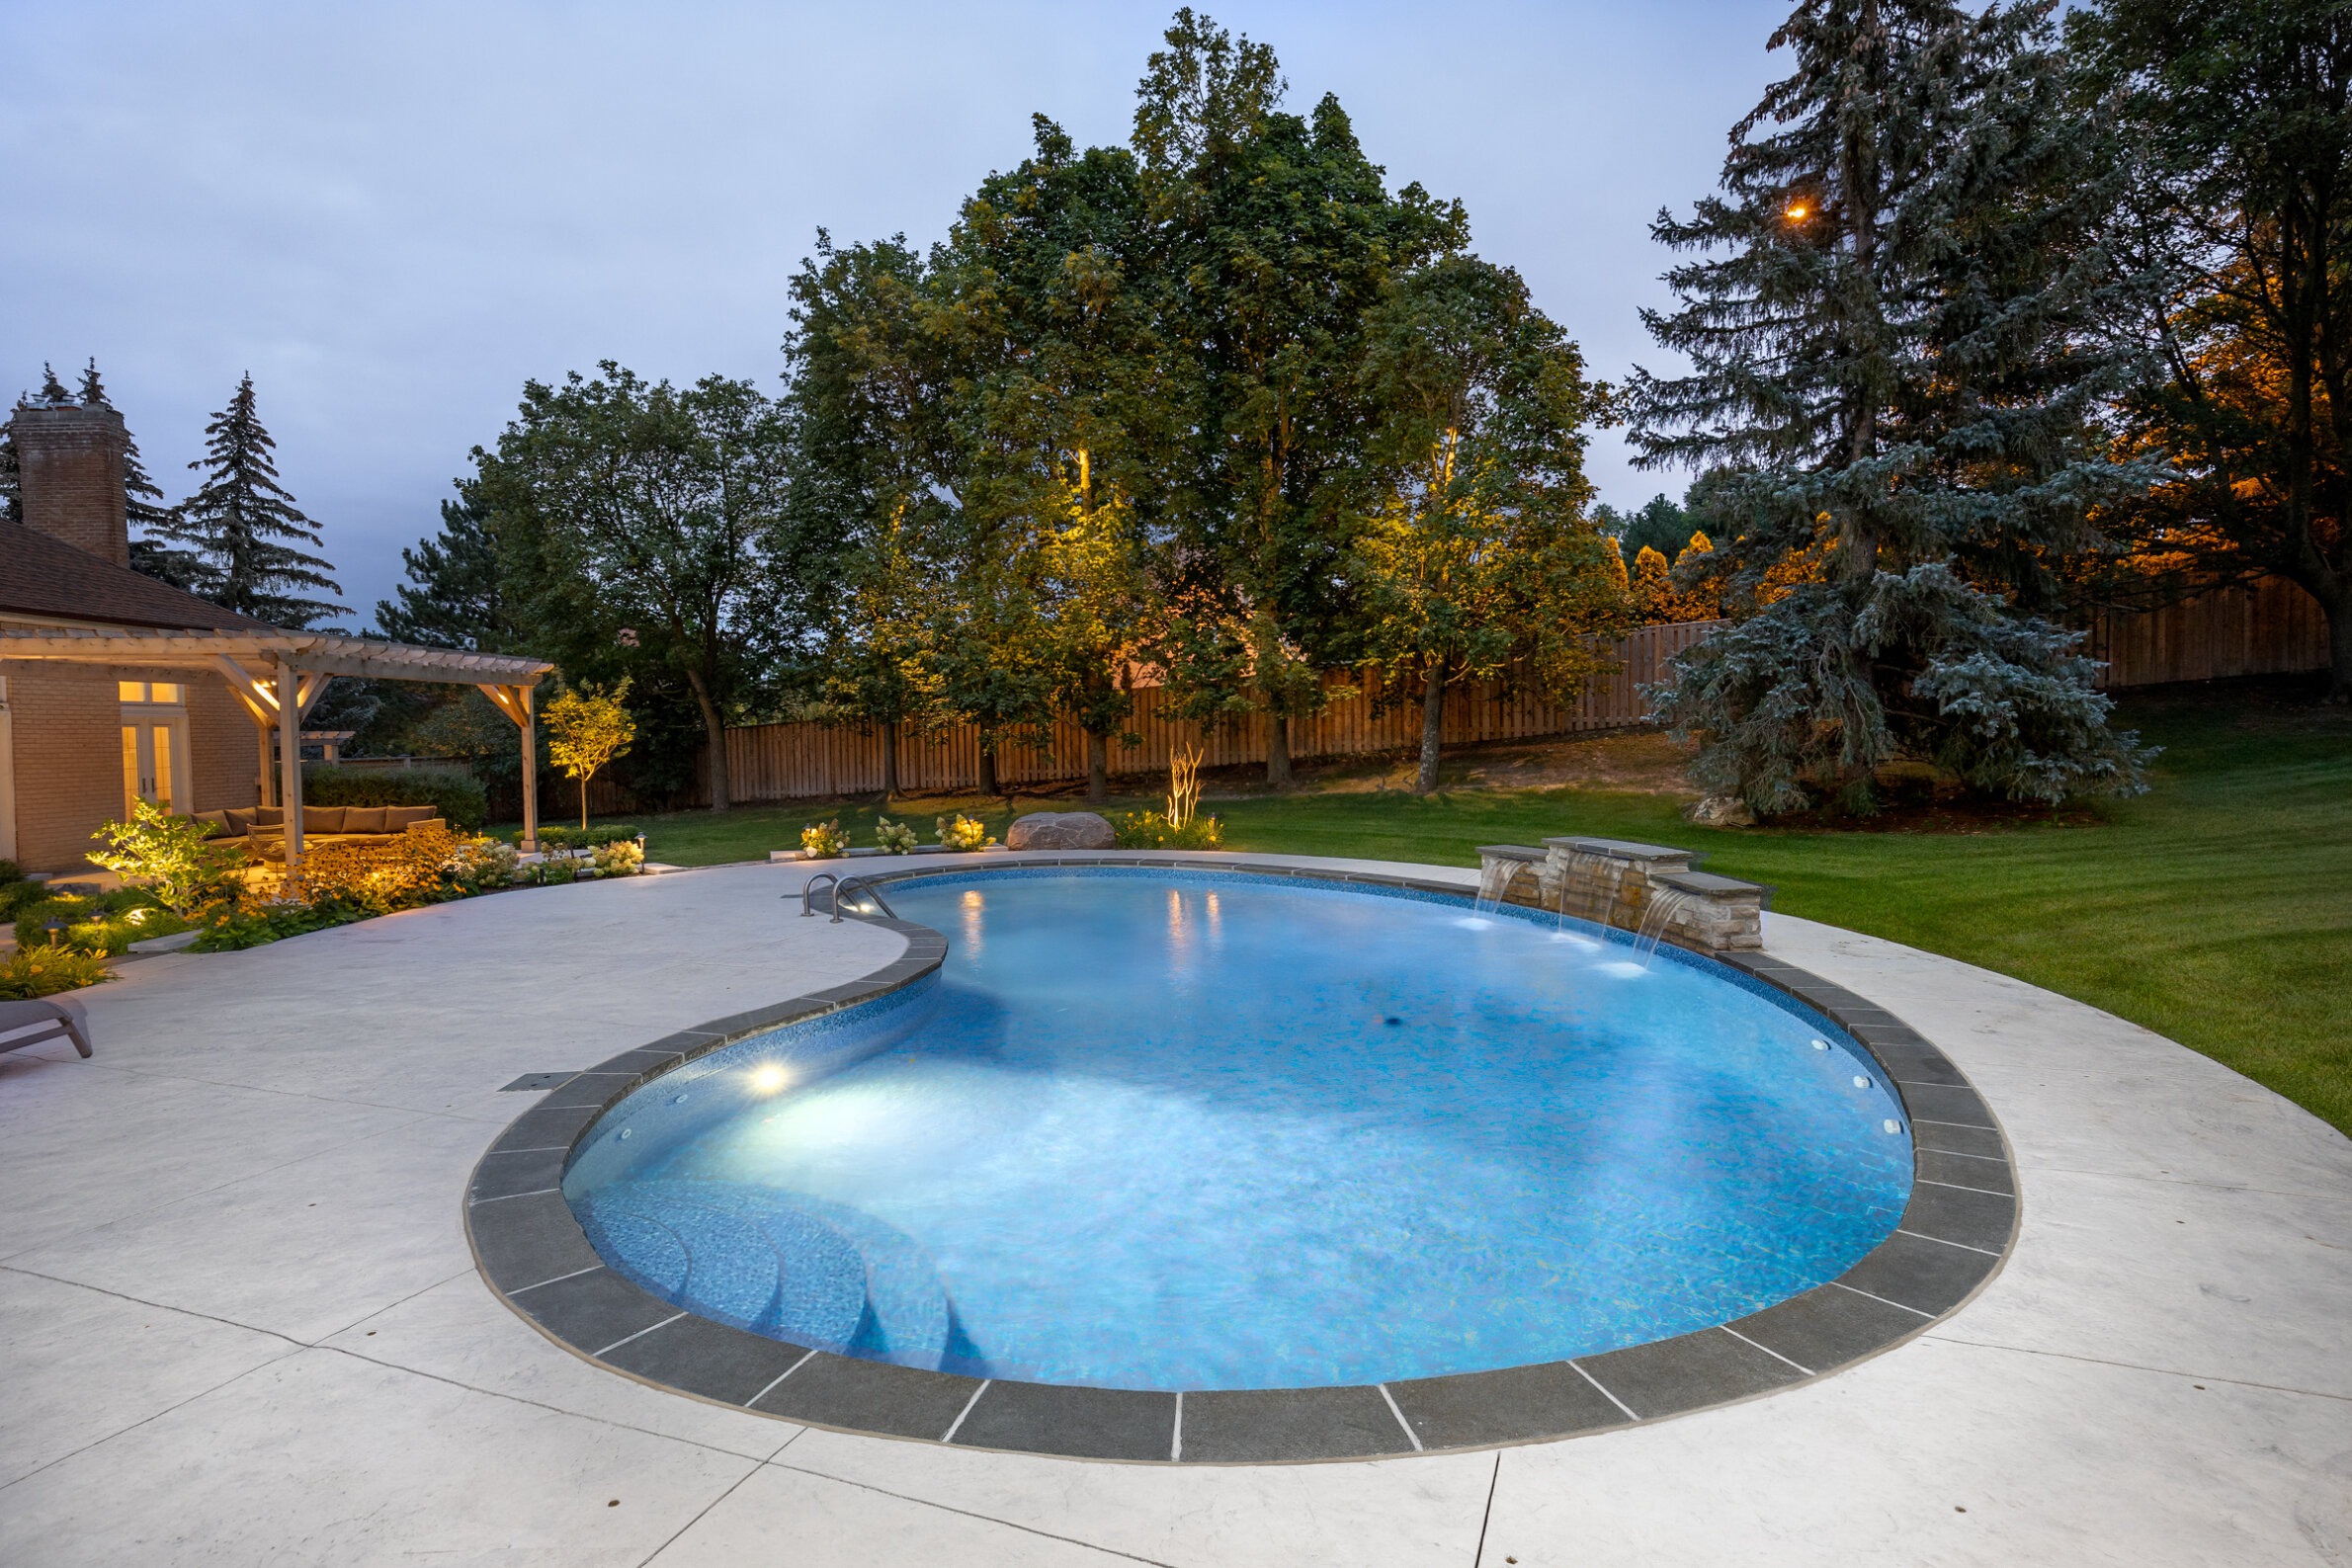 An elegantly lit backyard at twilight, featuring a curved in-ground pool with a waterfall, surrounded by manicured grass and a perimeter fence.